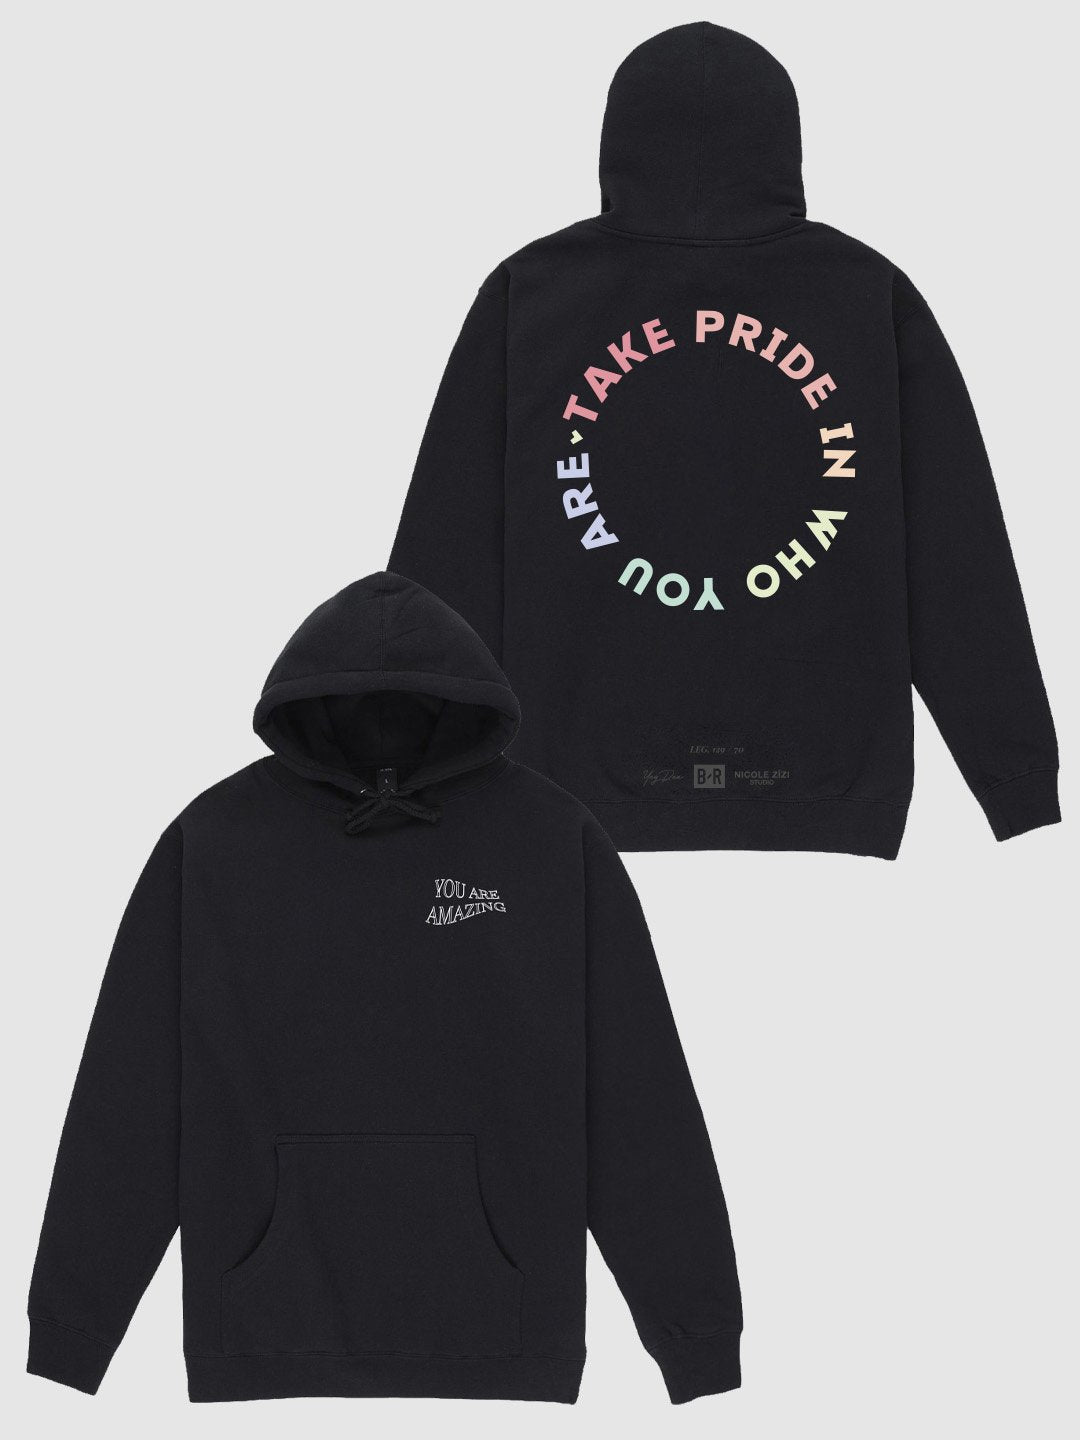 NICOLE ZÏZI STUDIO Teams up with The Wade Family, YnG DnA and Bleacher Report celebrating and raising awareness for the LGBTQIA+ through a sustainably produced capsule collection